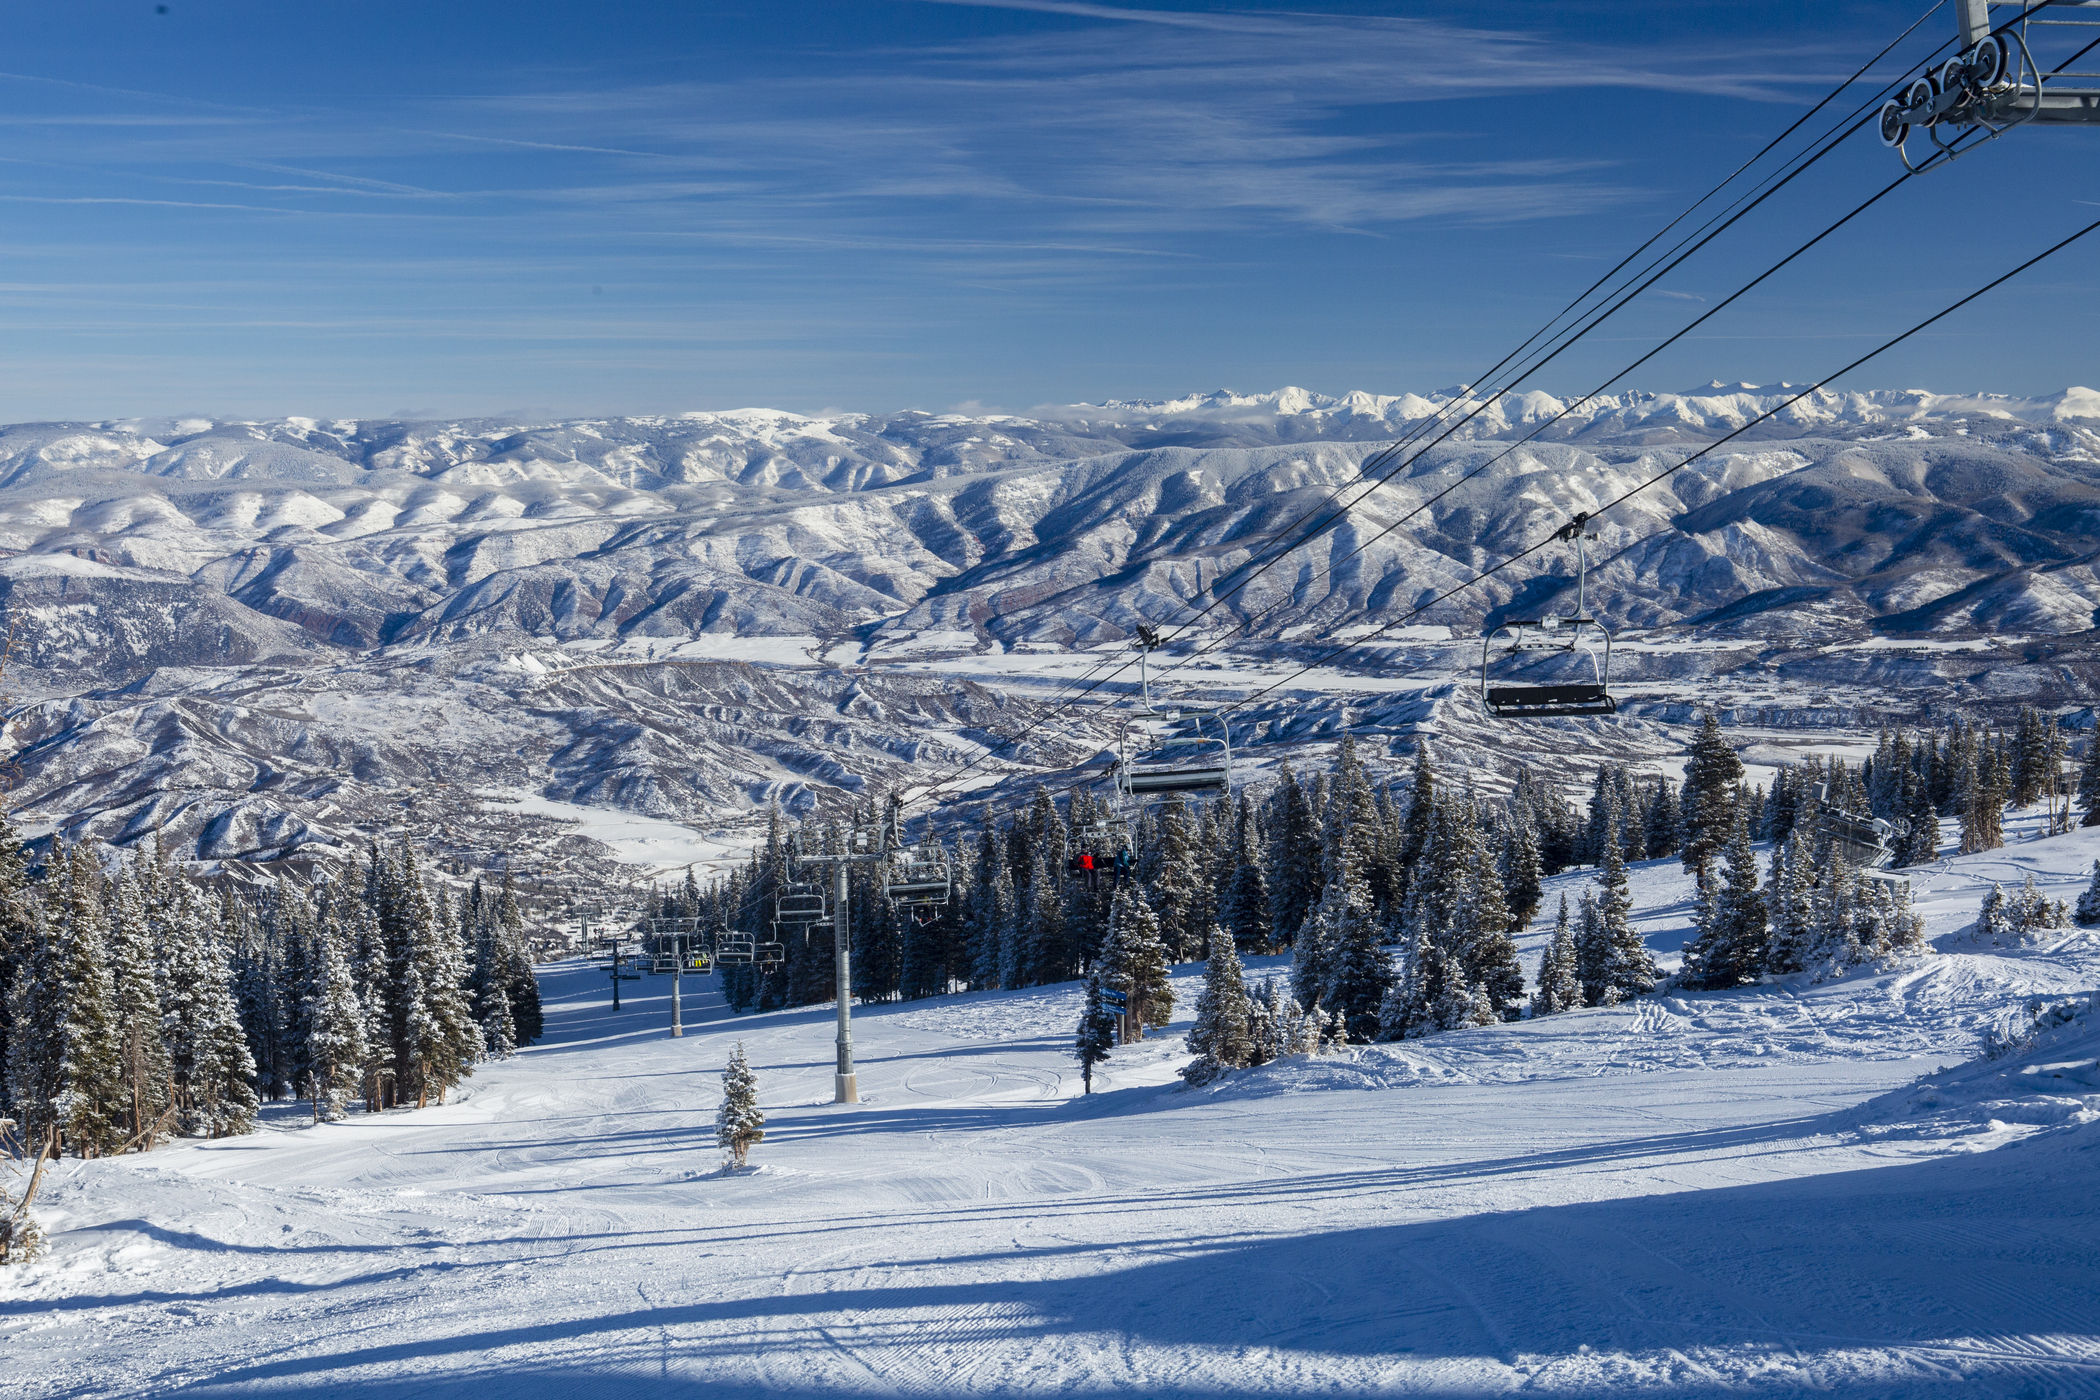 10 Reasons to Visit Aspen Snowmass in 2021